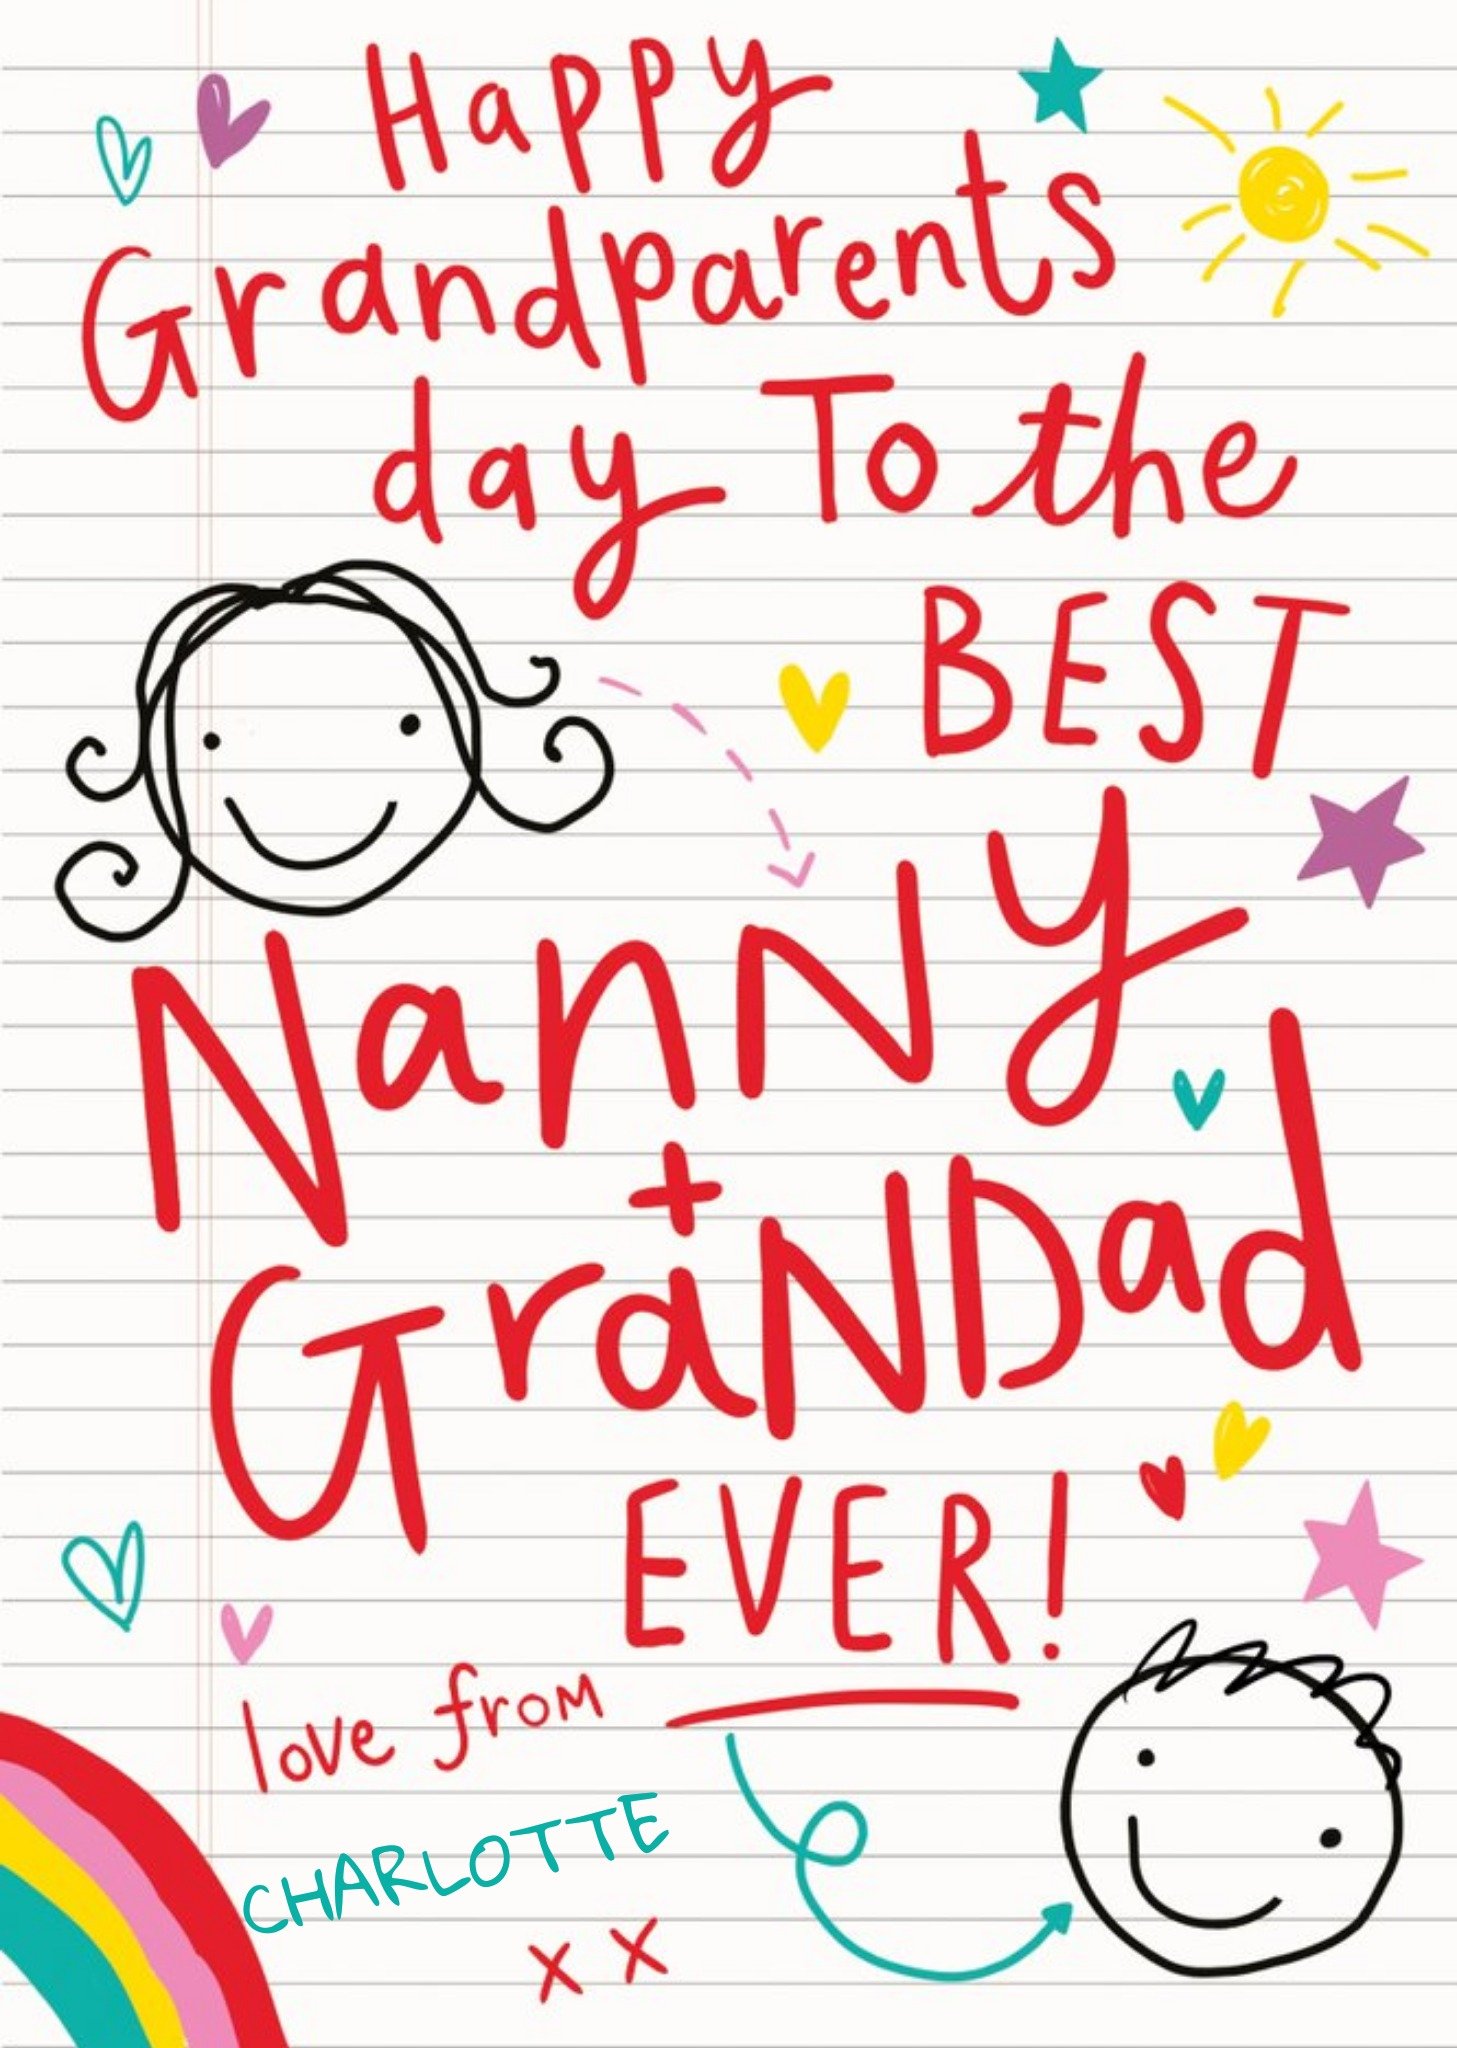 Moonpig Grandparents Day Card With Childs Stick Drawings For Nanny And Grandad, Large